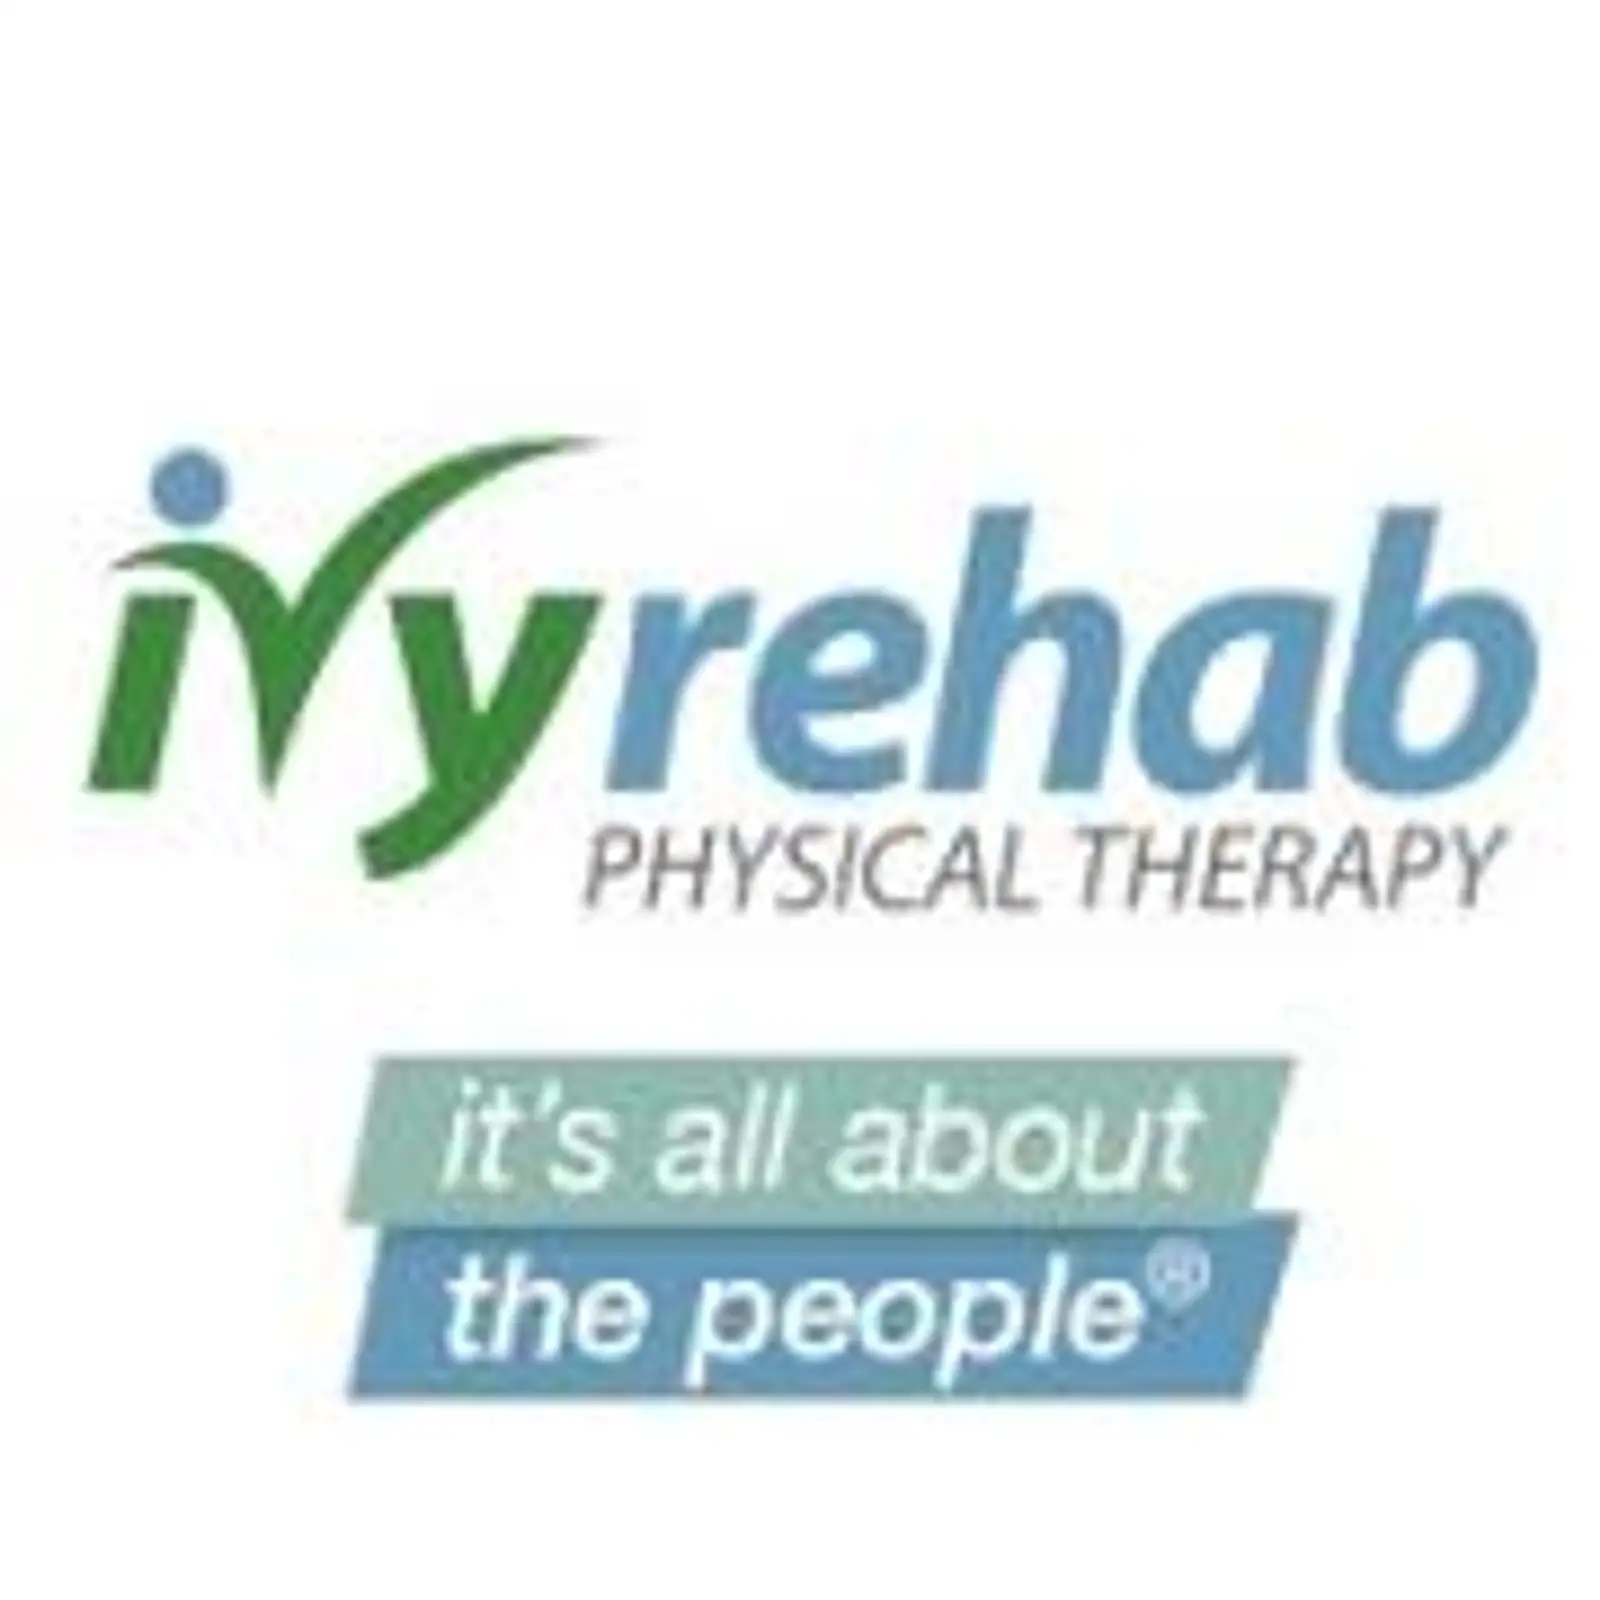 Ivy Physical Therapy logo